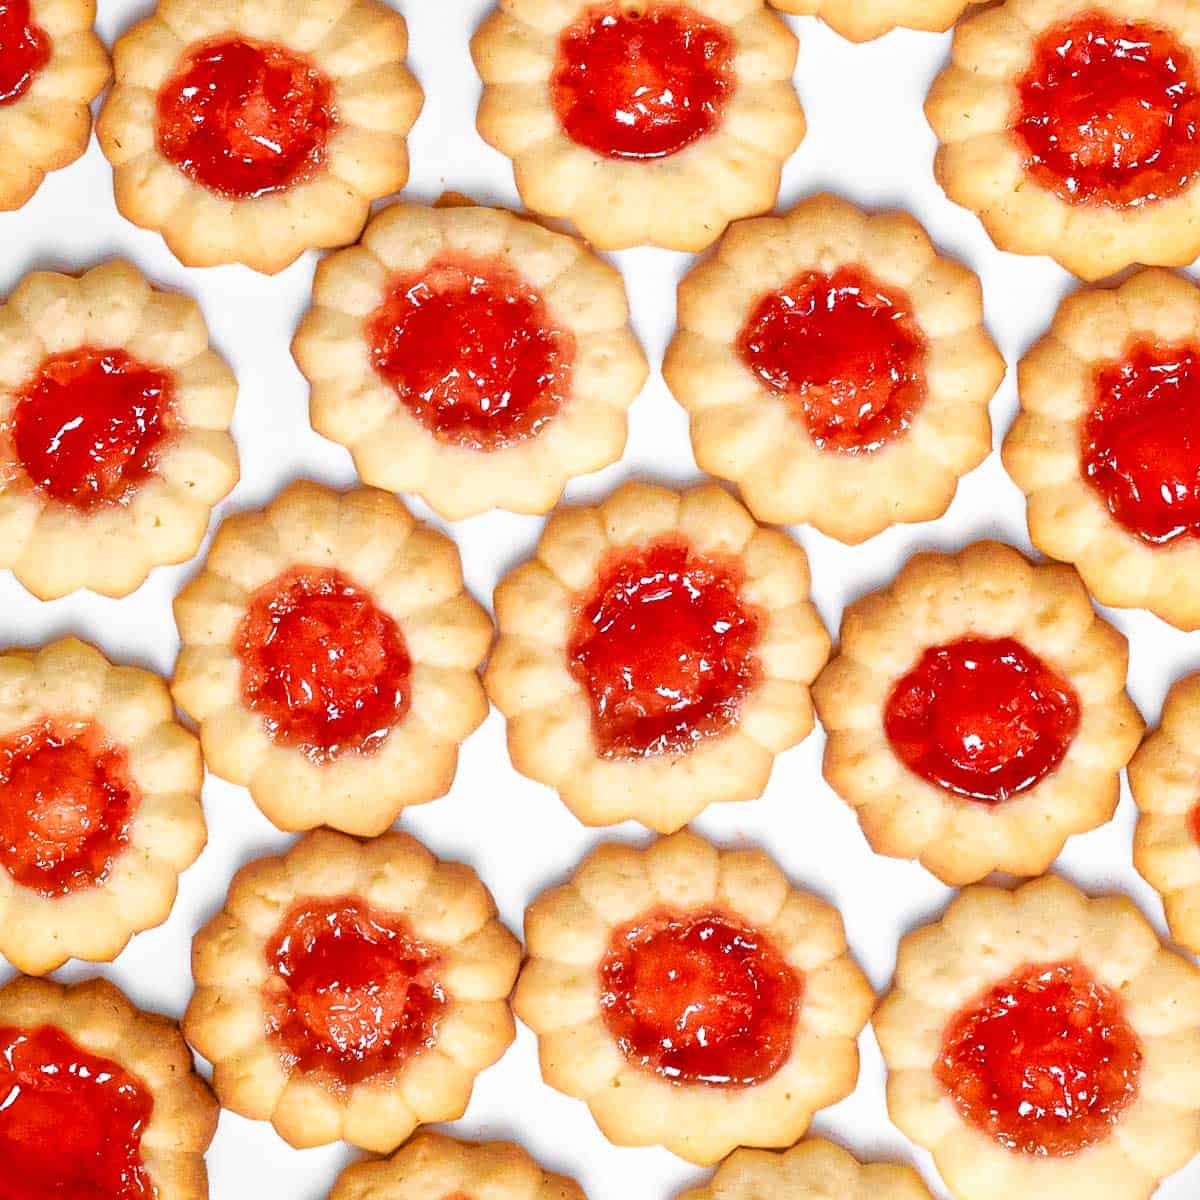 A close up of jam thumbprint cookies filled with red jam on a white surface.